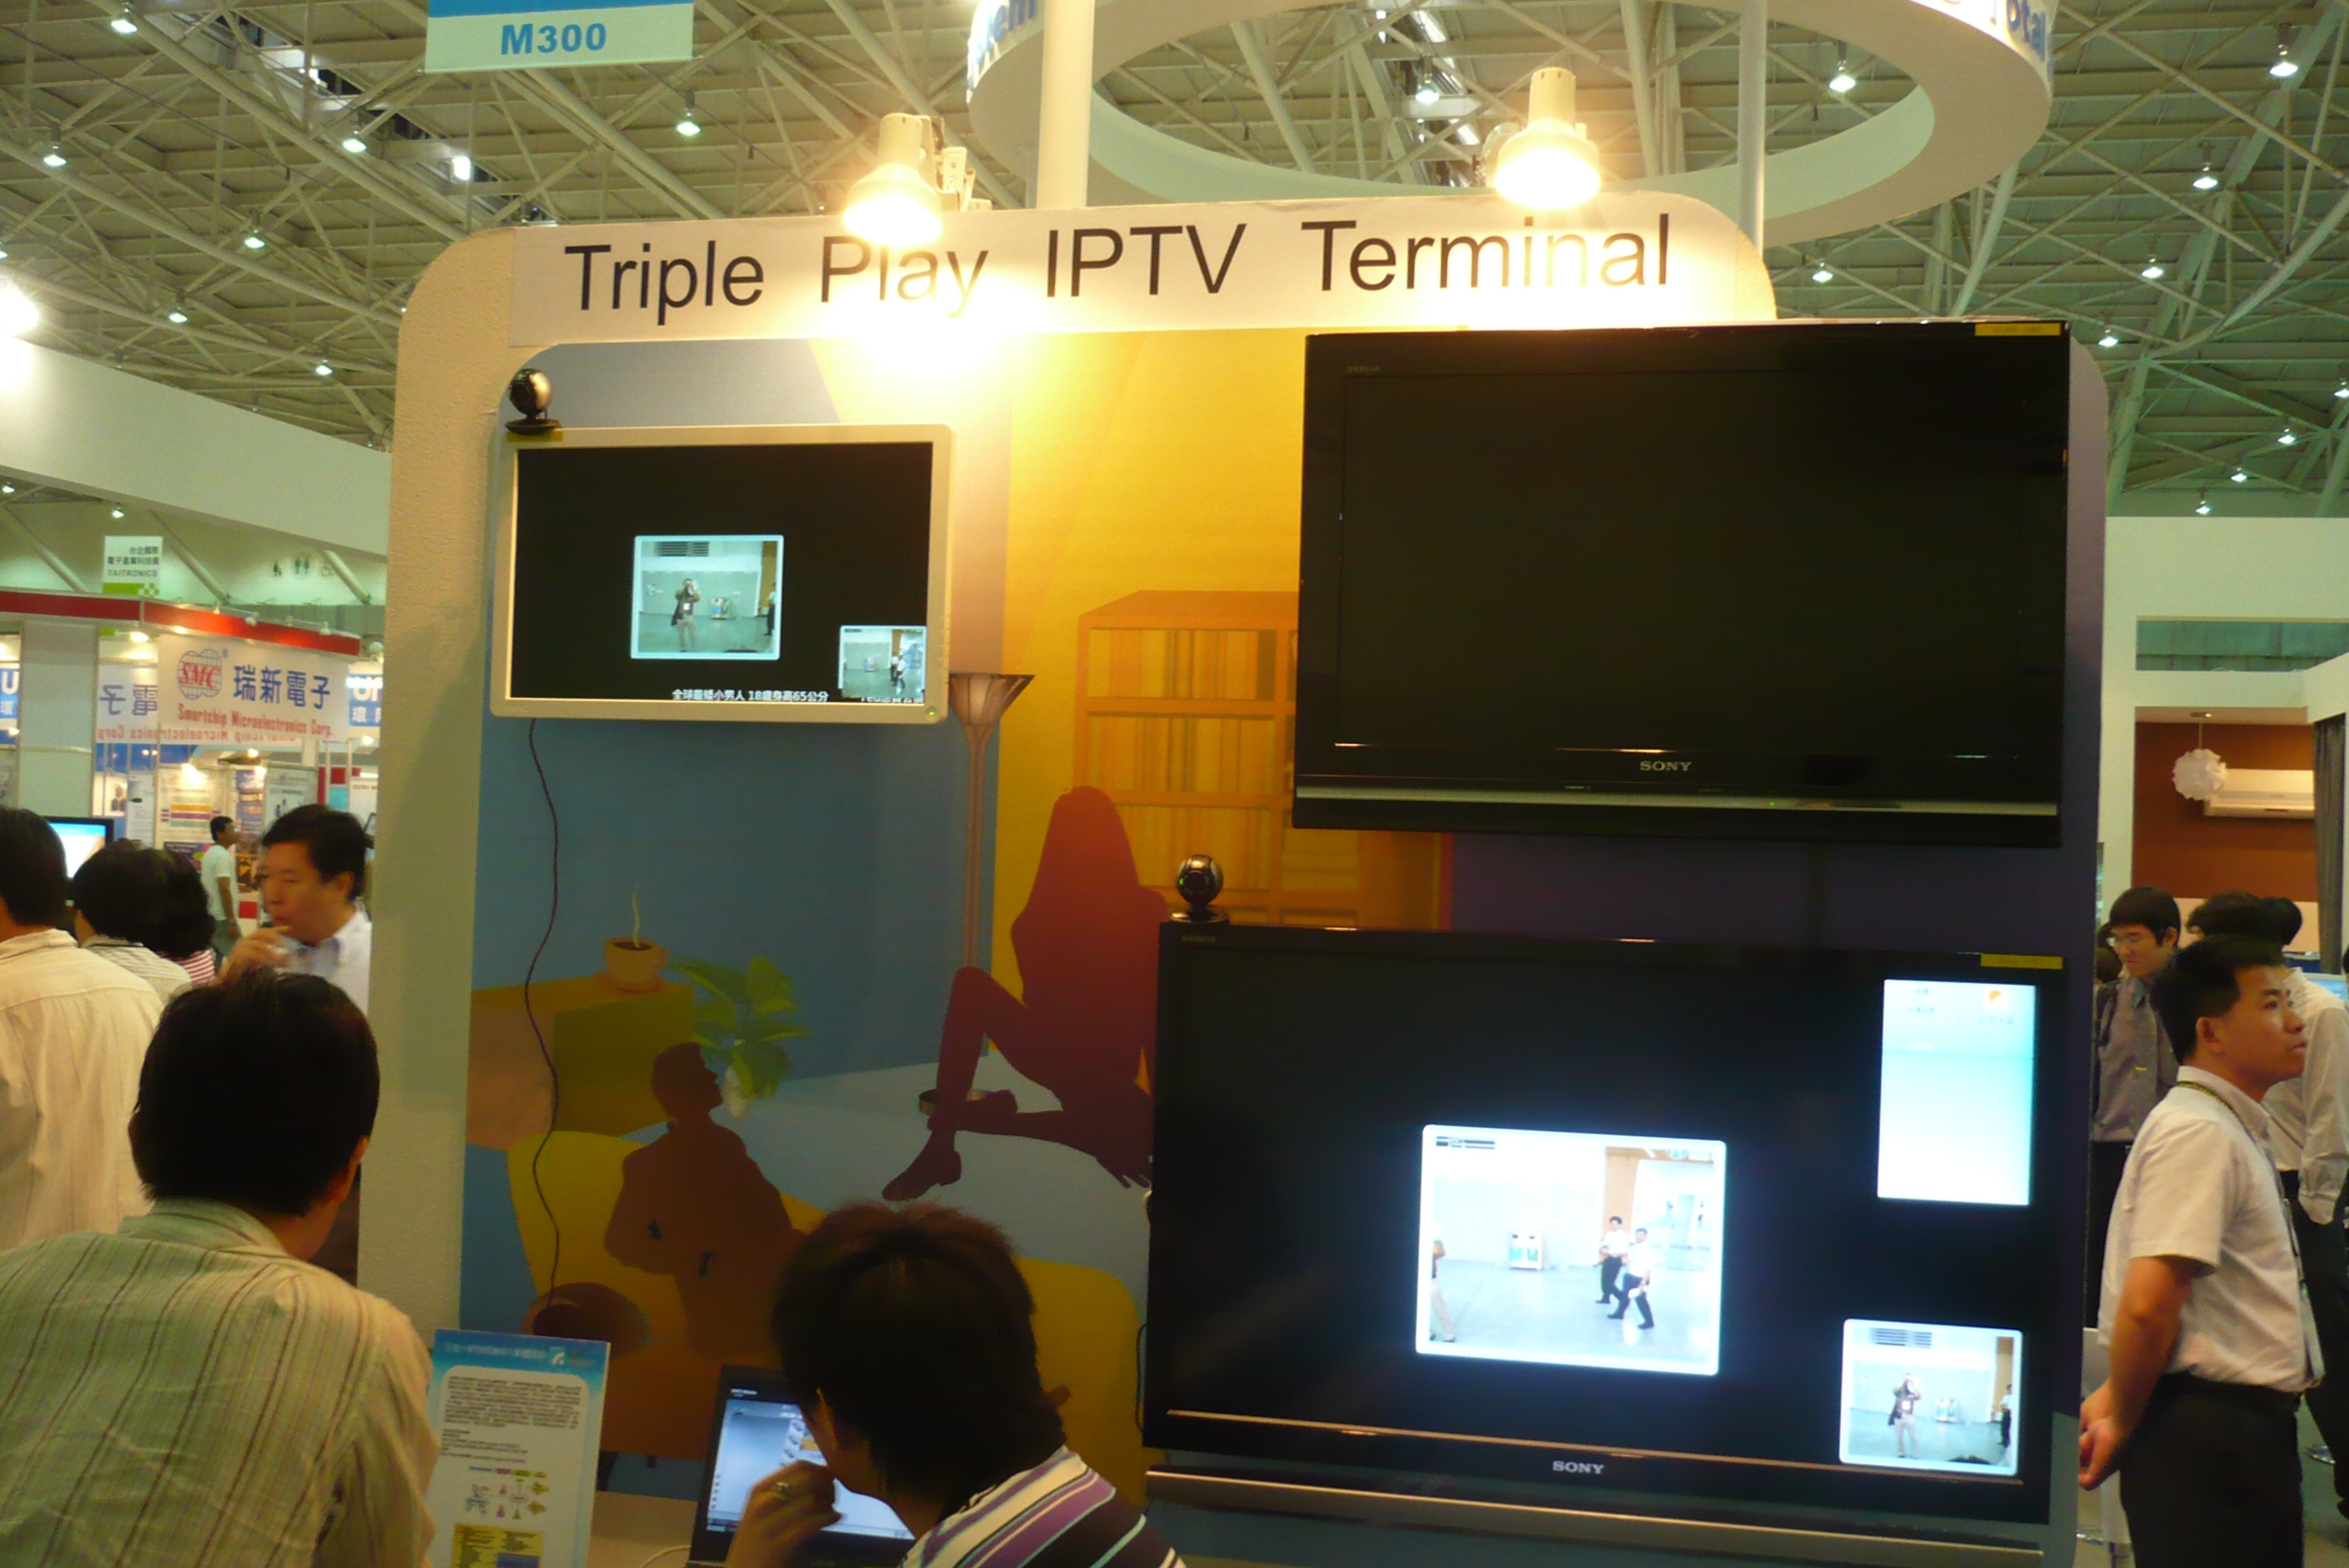 Triple-play IP TV, among others, will buoy IPC equipment market into 2011.